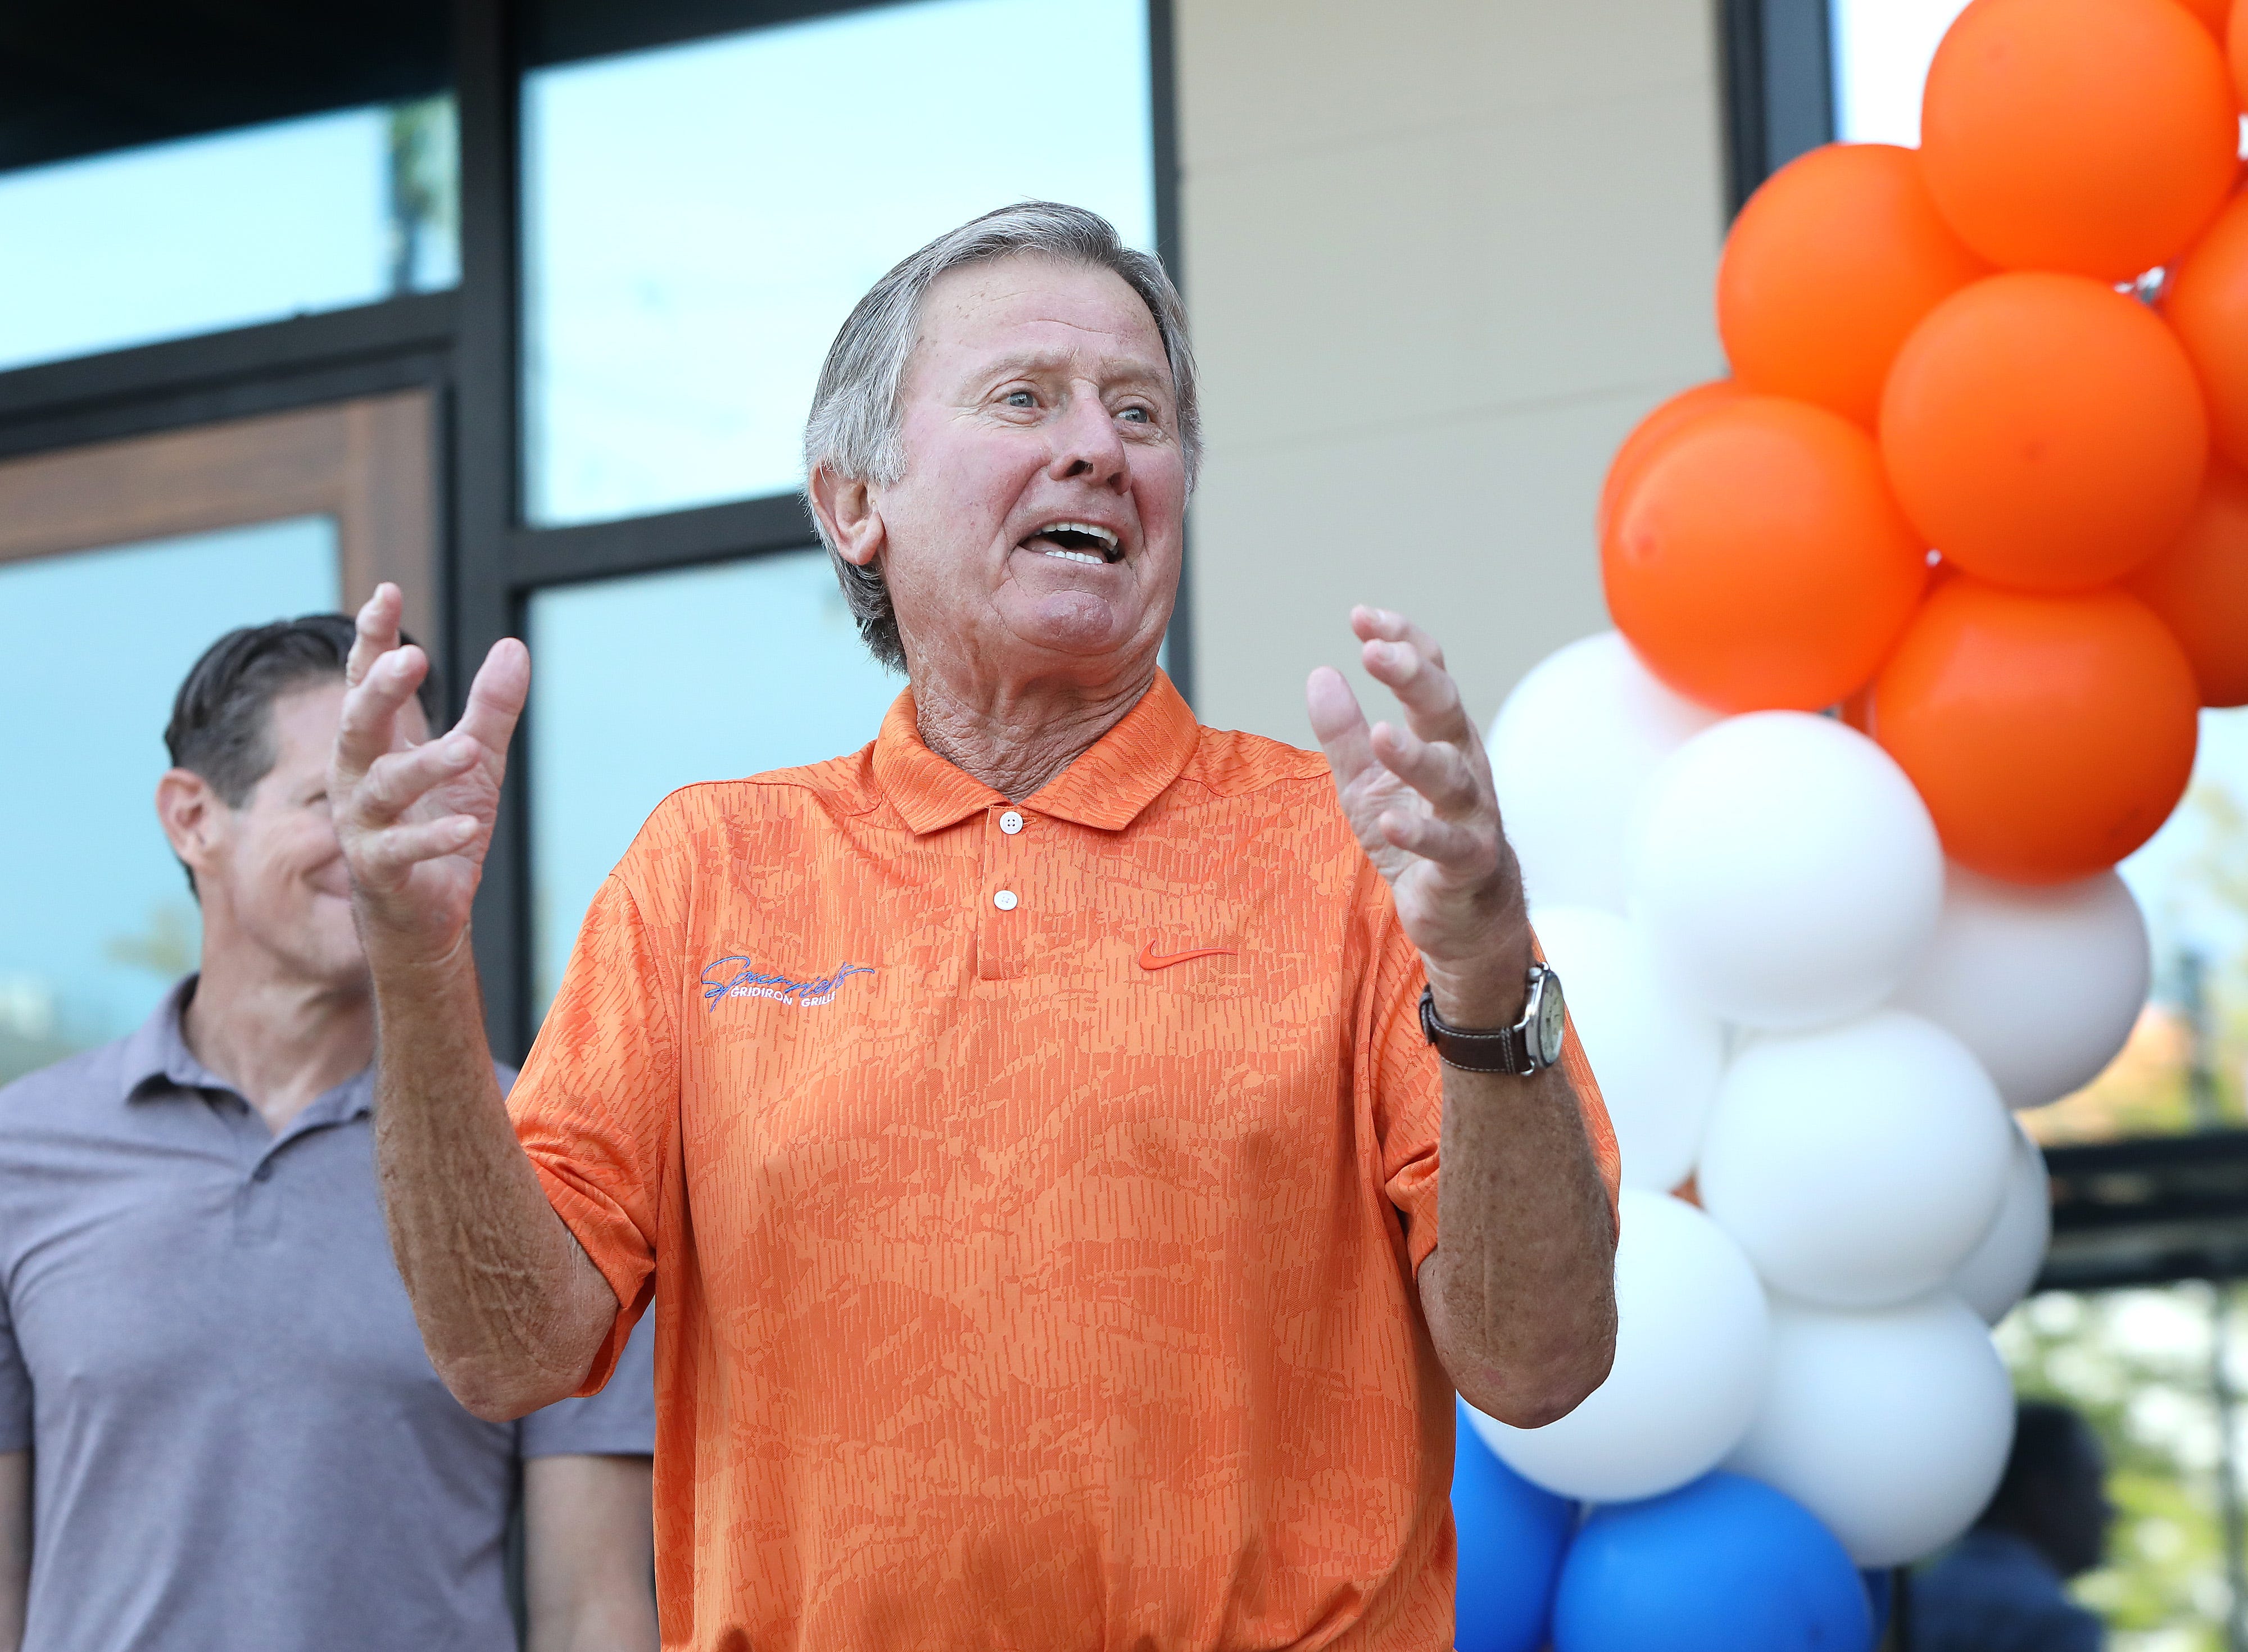 Analysis: Steve Spurrier's favorite win over Tennessee football might surprise you